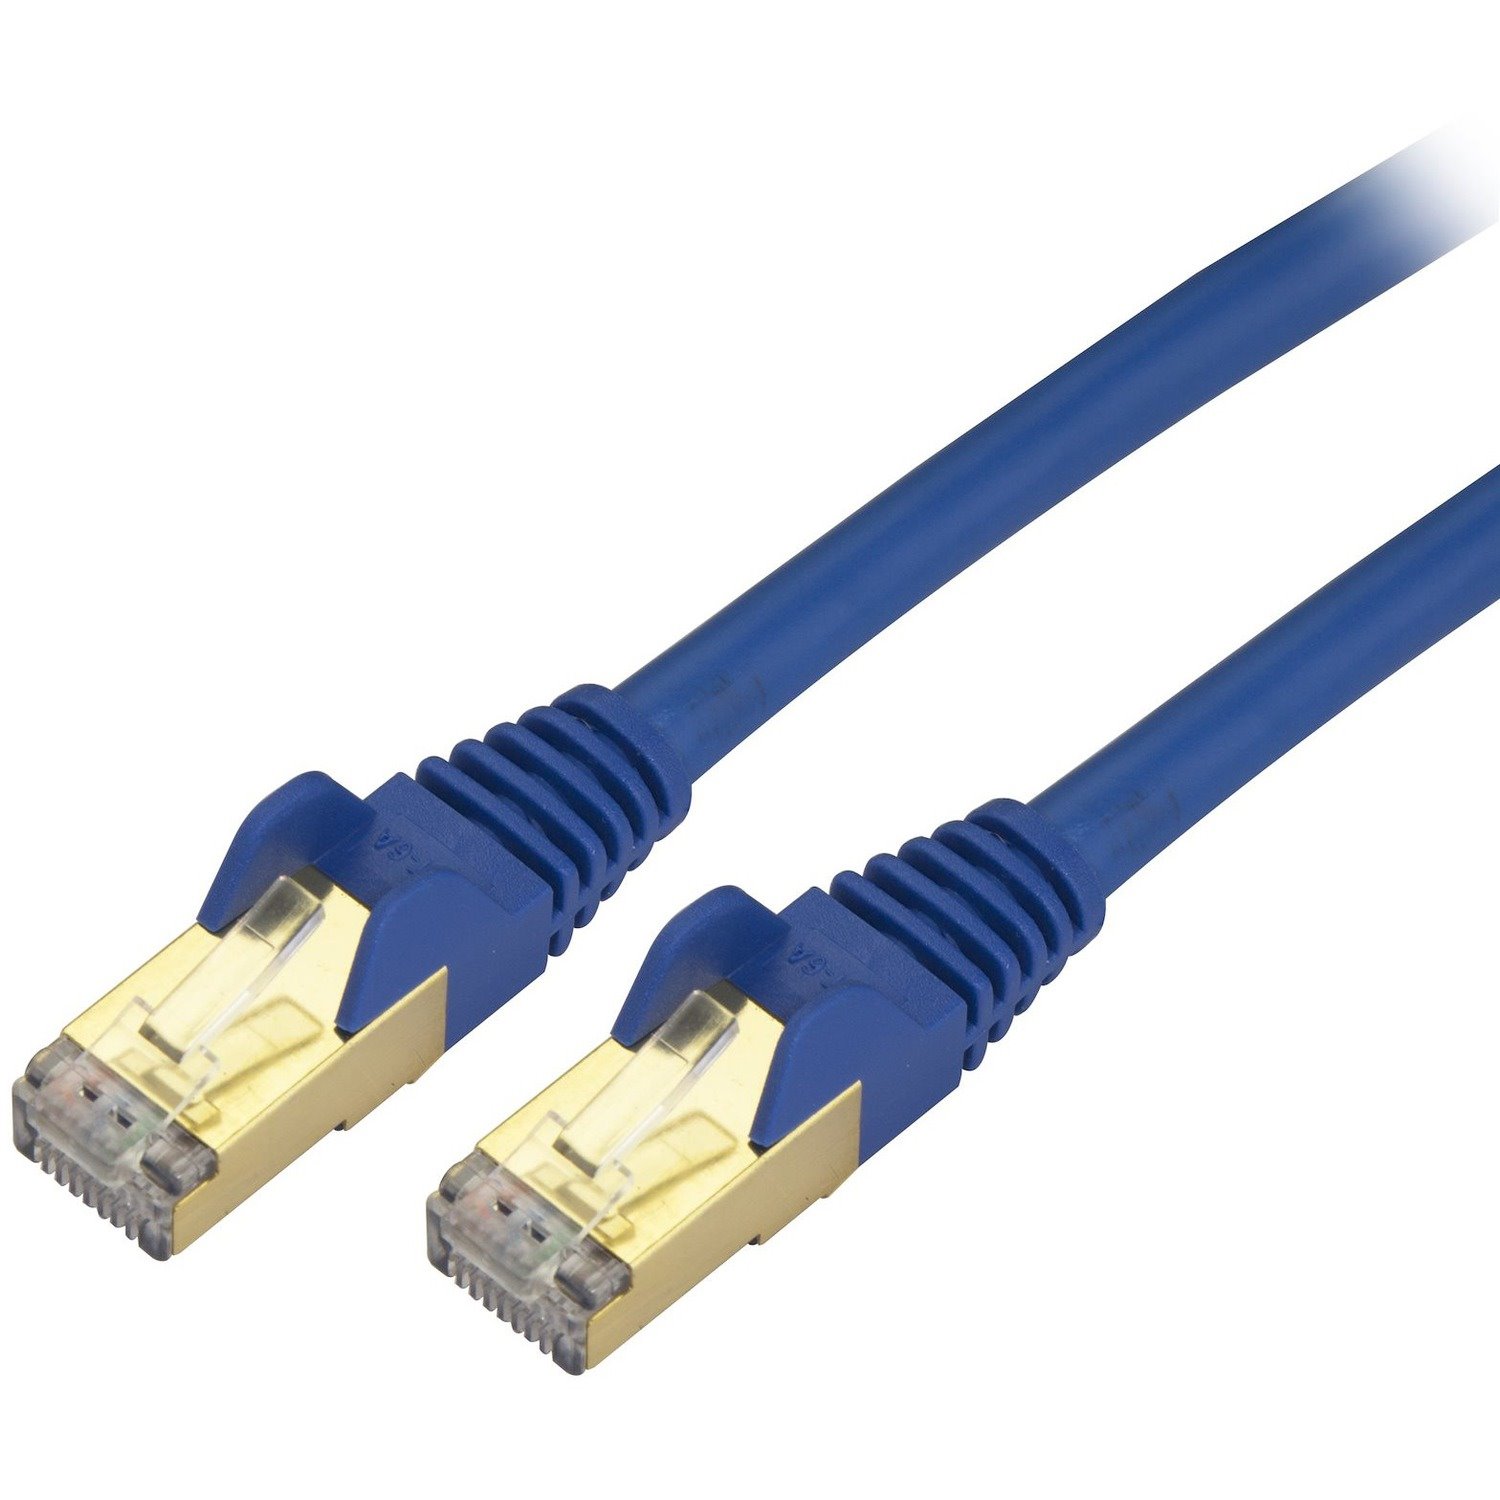 StarTech.com 6 in CAT6a Ethernet Cable - 10 Gigabit Category 6a Shielded Snagless 100W PoE Patch Cord - 10GbE Blue UL Certified Wiring/TIA